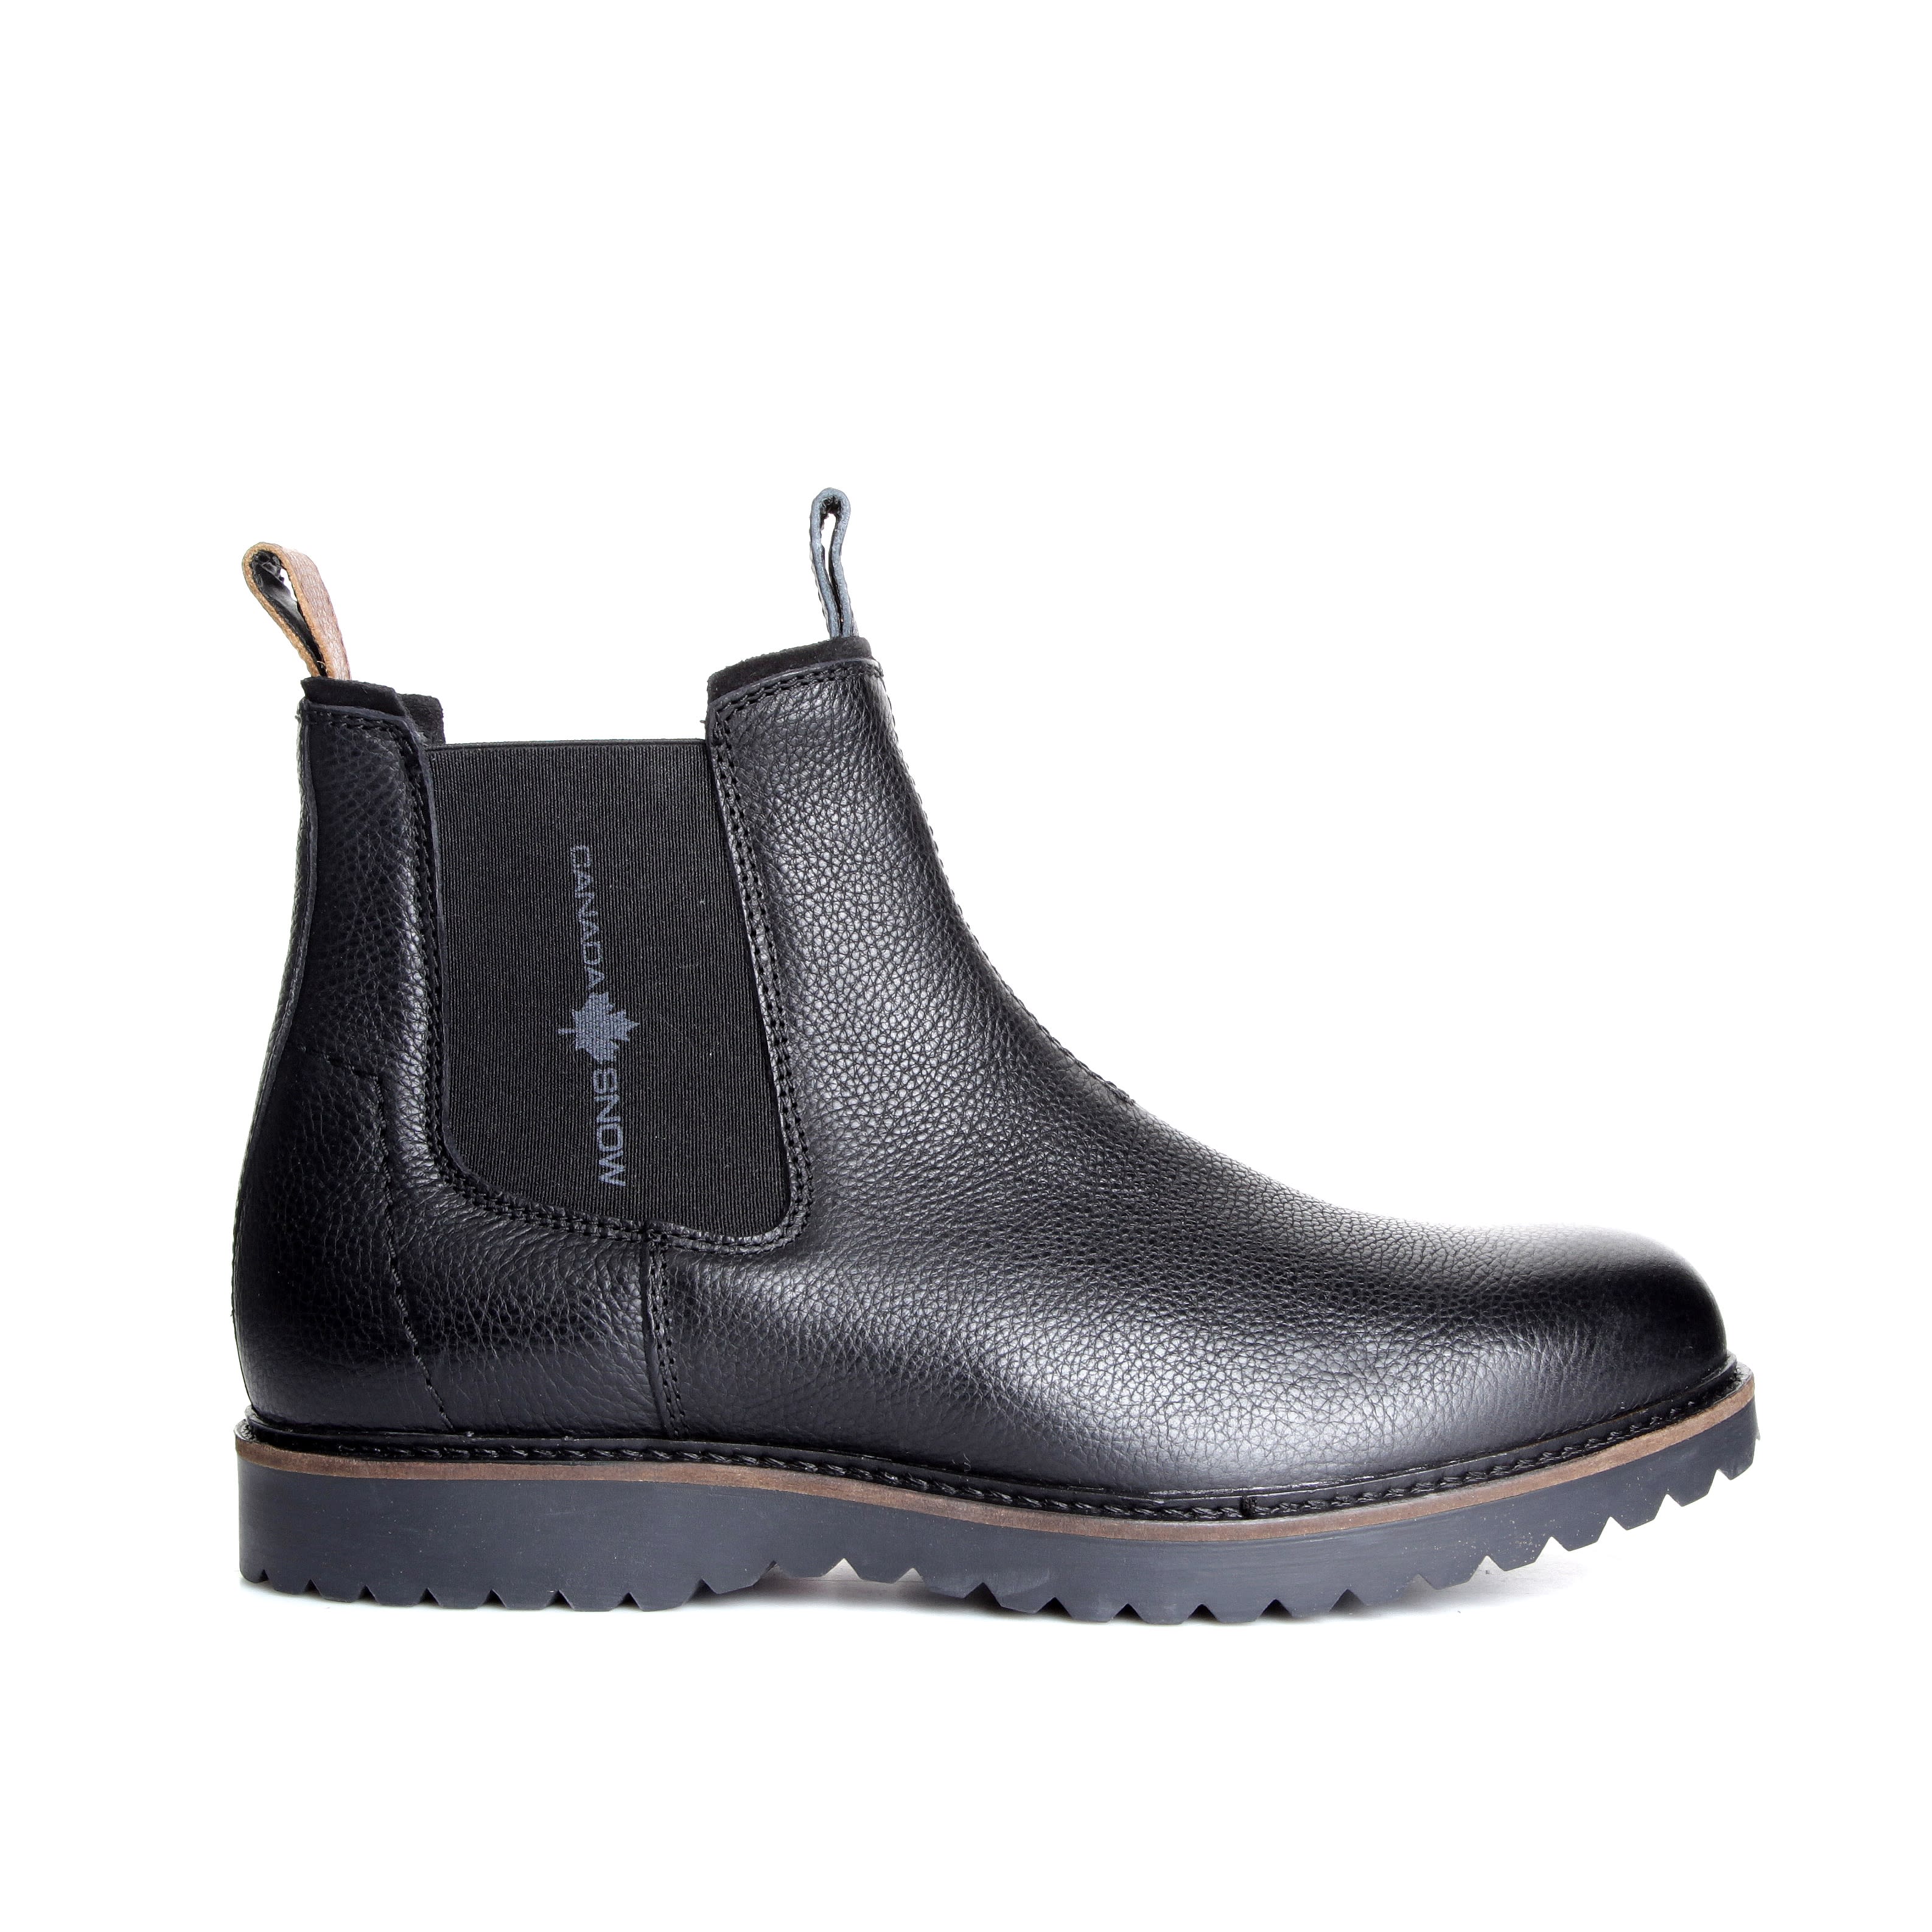 Buy Canada Snow Men's William Chelsea Boot from Outnorth